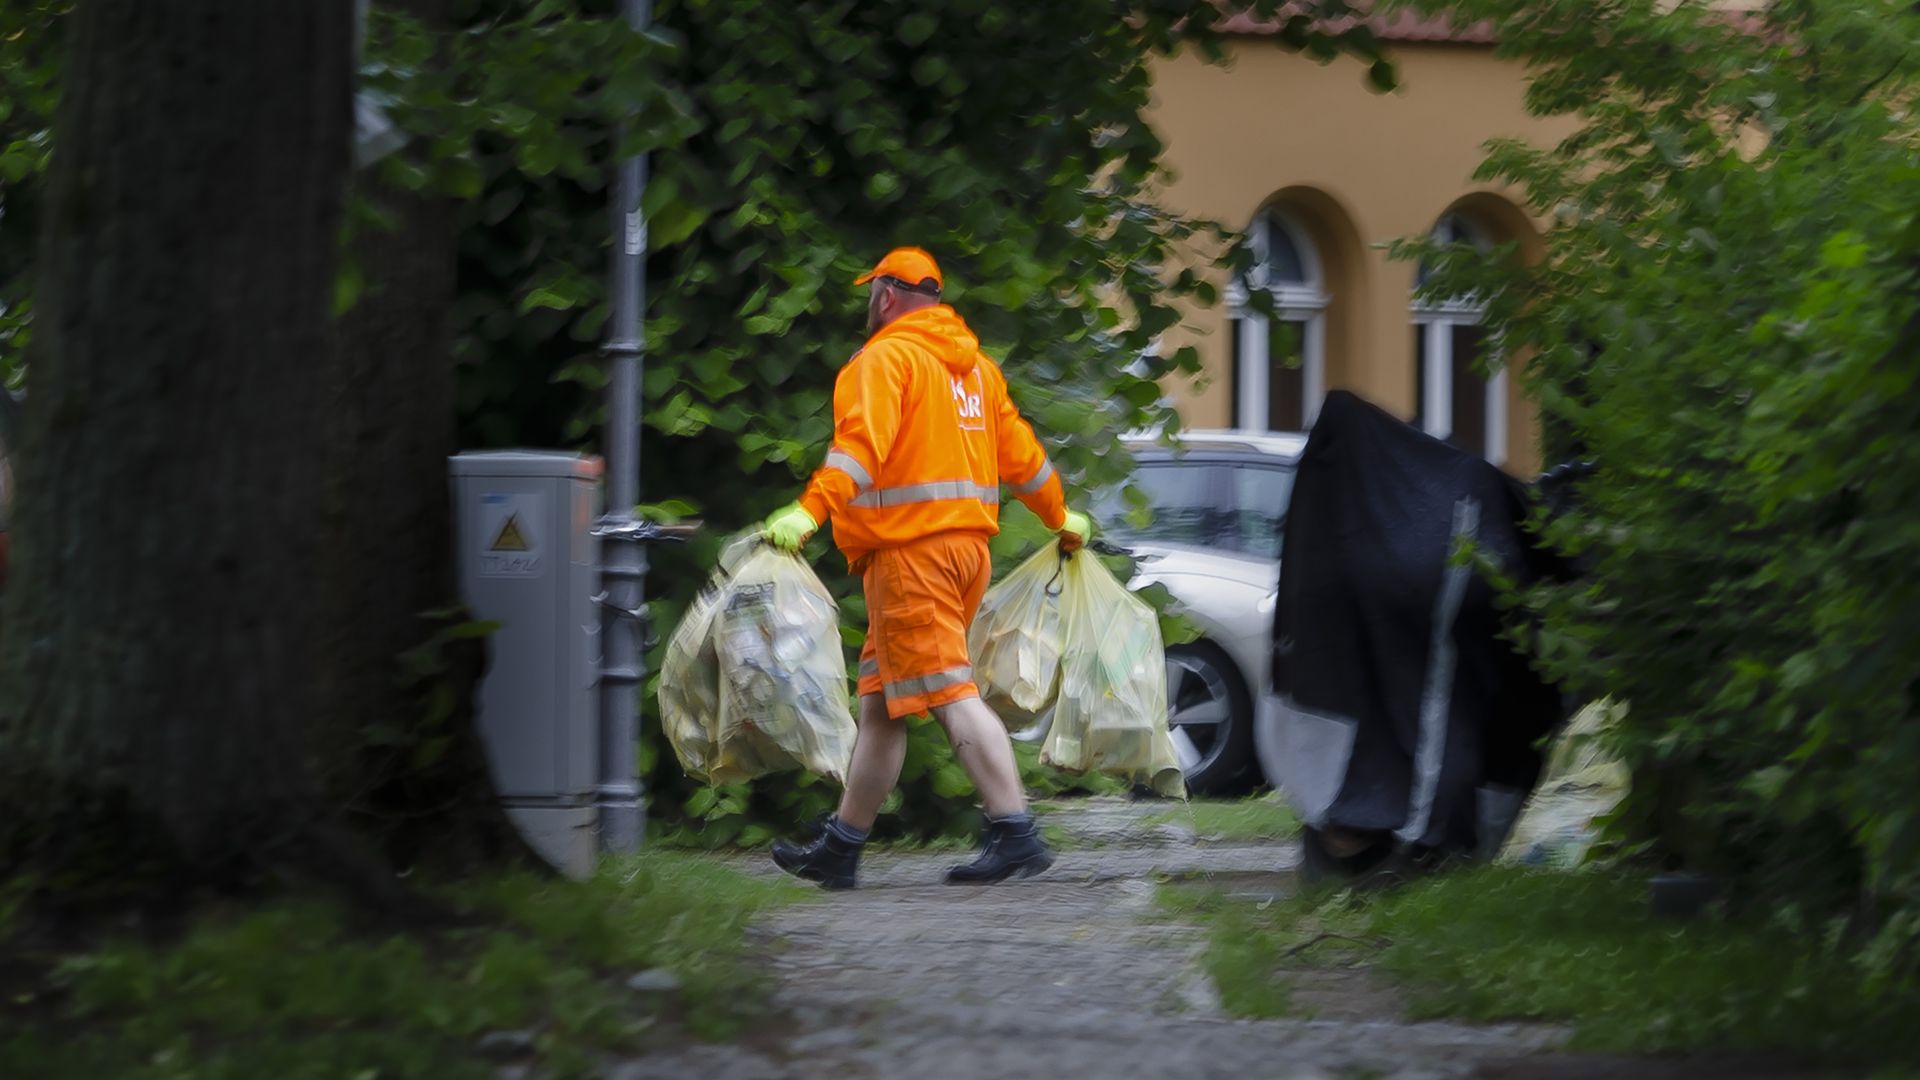 A garbage man carries bags of plastic waste for recycling